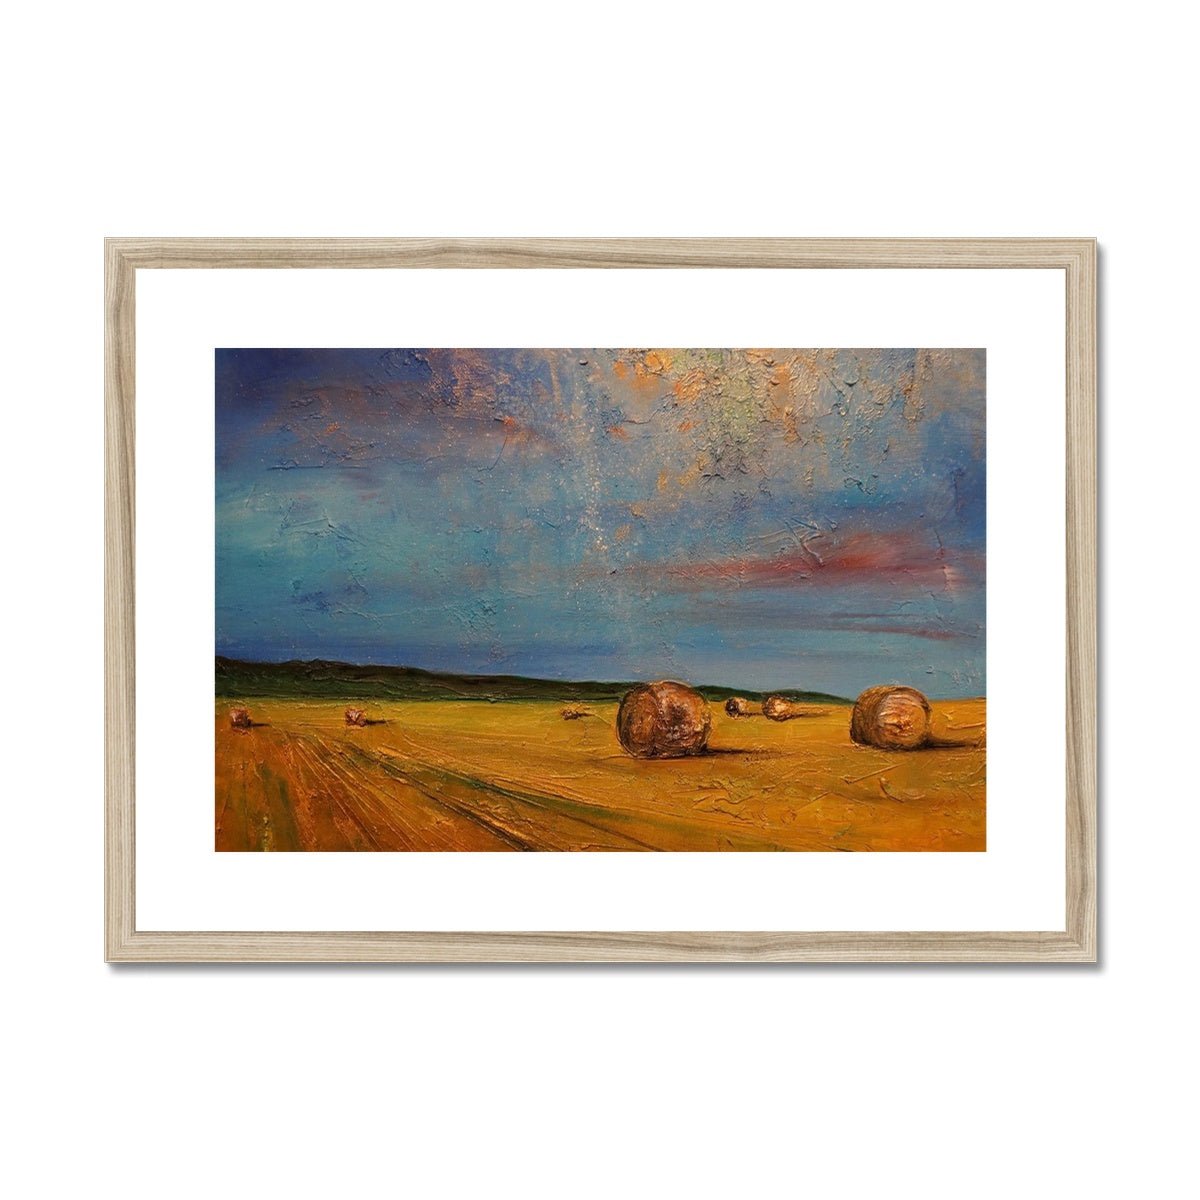 Hay Bales Painting | Framed & Mounted Prints From Scotland-Framed & Mounted Prints-Scottish Highlands & Lowlands Art Gallery-A2 Landscape-Natural Frame-Paintings, Prints, Homeware, Art Gifts From Scotland By Scottish Artist Kevin Hunter